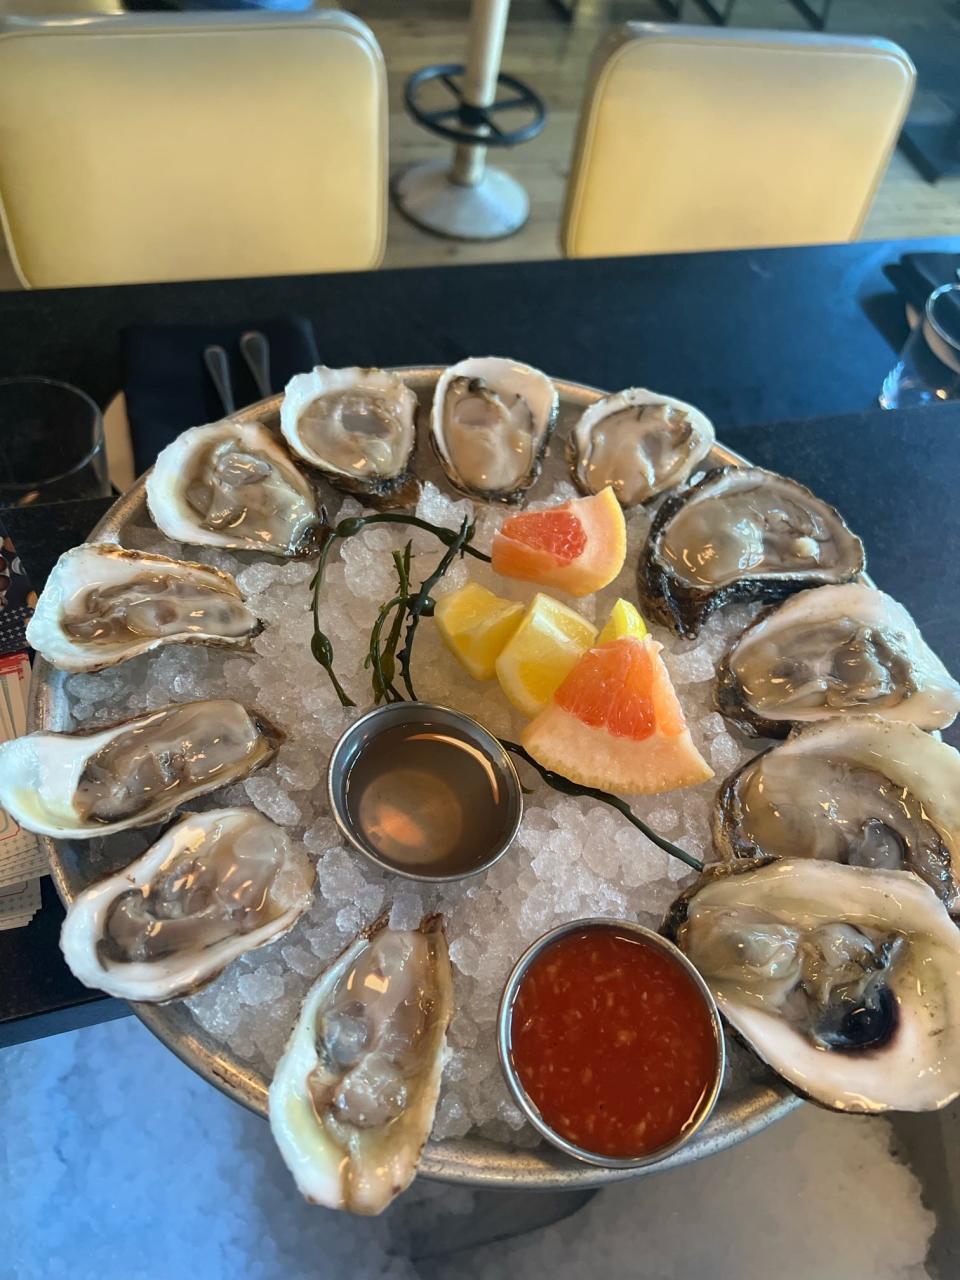 A plate of Blue Point oysters is served up at Crave Fish Bar in New York. Most oyster experts will encourage you to forgo the sauce and stick with the fruit, the better to taste the oyster. This array is presented with slices of lemon and grapefruit, which oyster expert Jeremy Benson prefers to sauce.